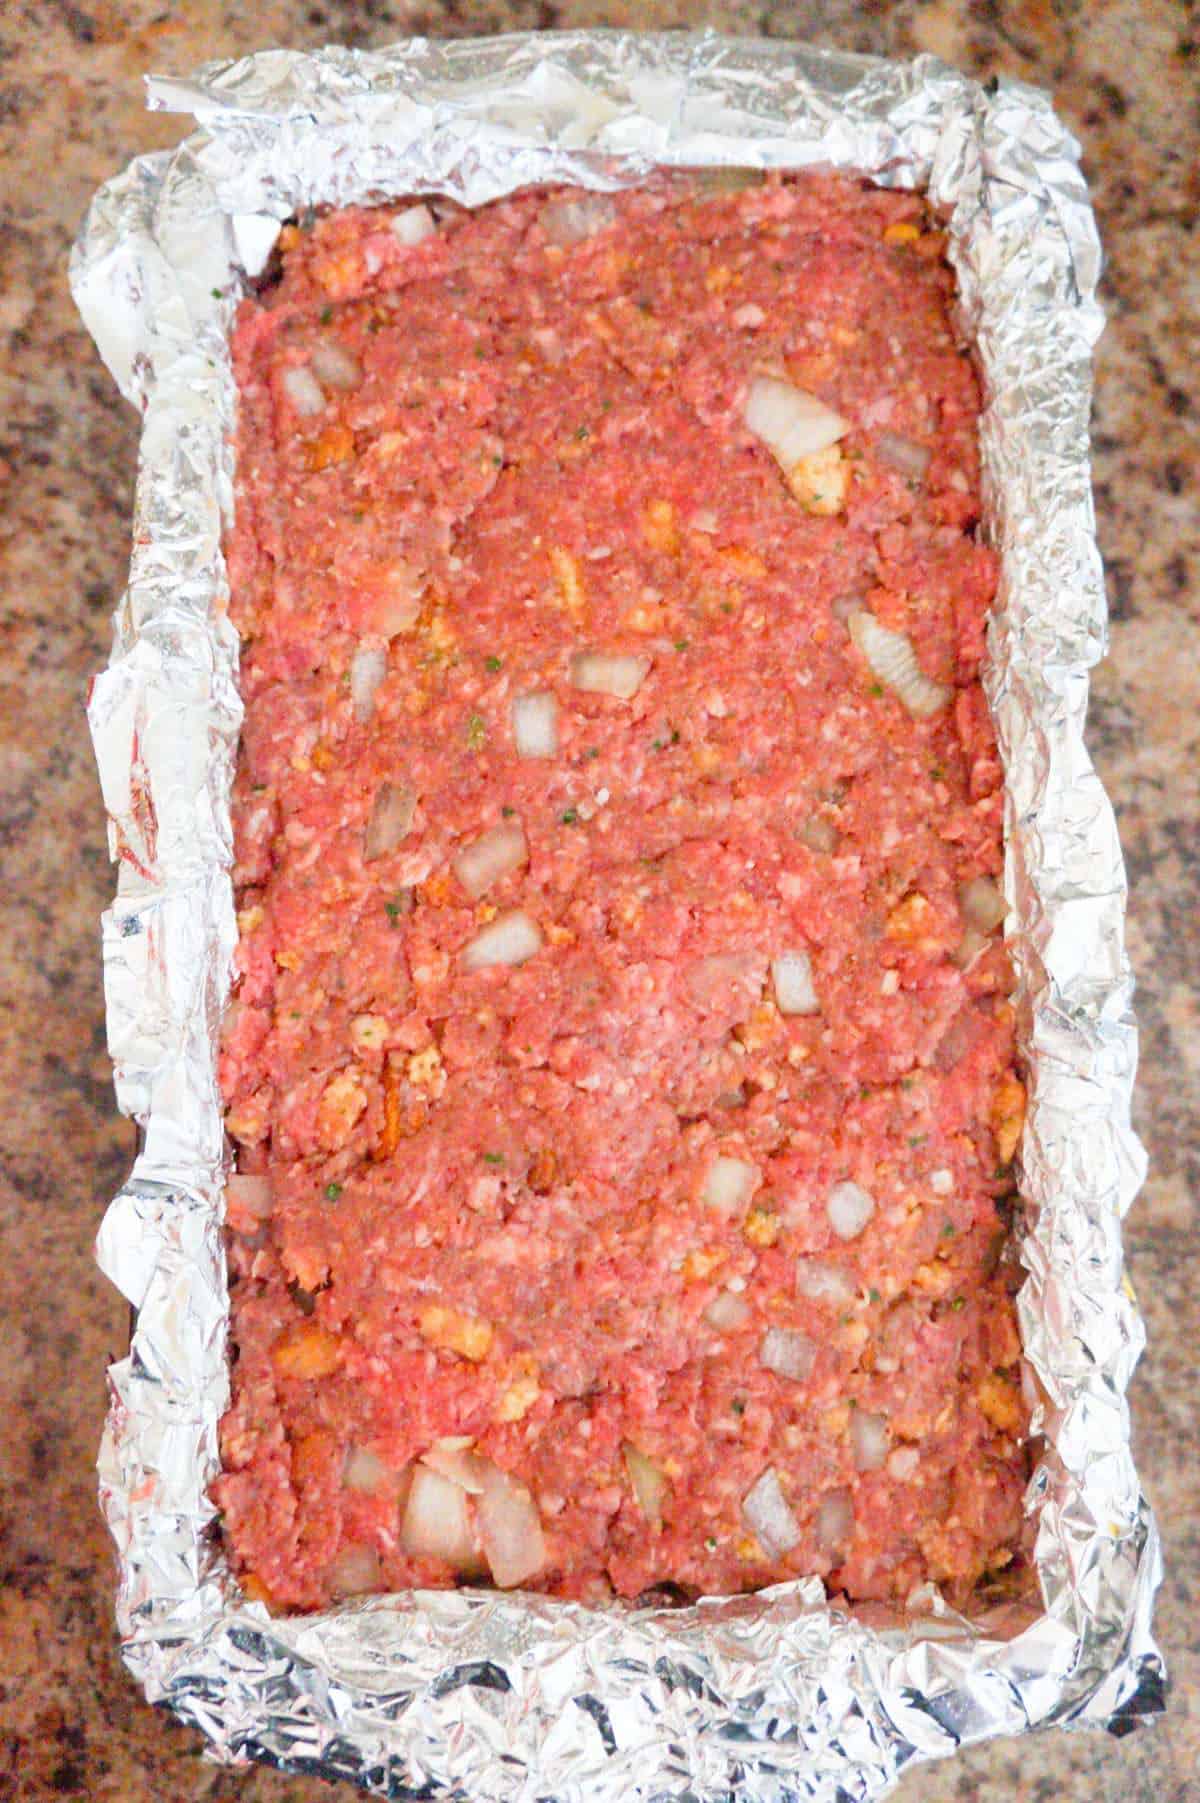 meatloaf mixture in a loaf pan before cooking